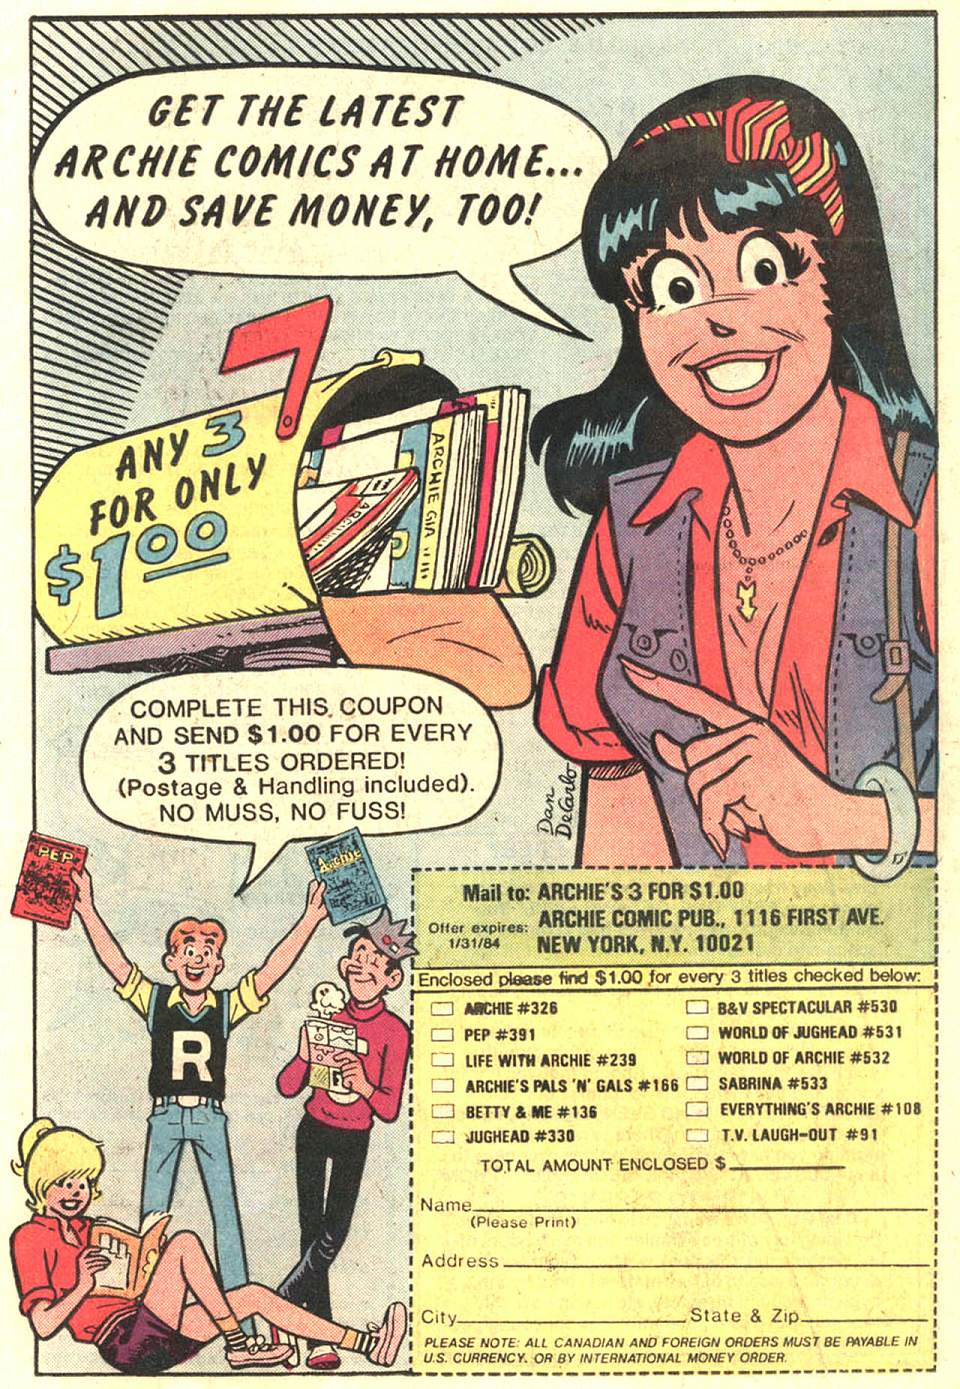 Read online Archie's TV Laugh-Out comic -  Issue #91 - 11